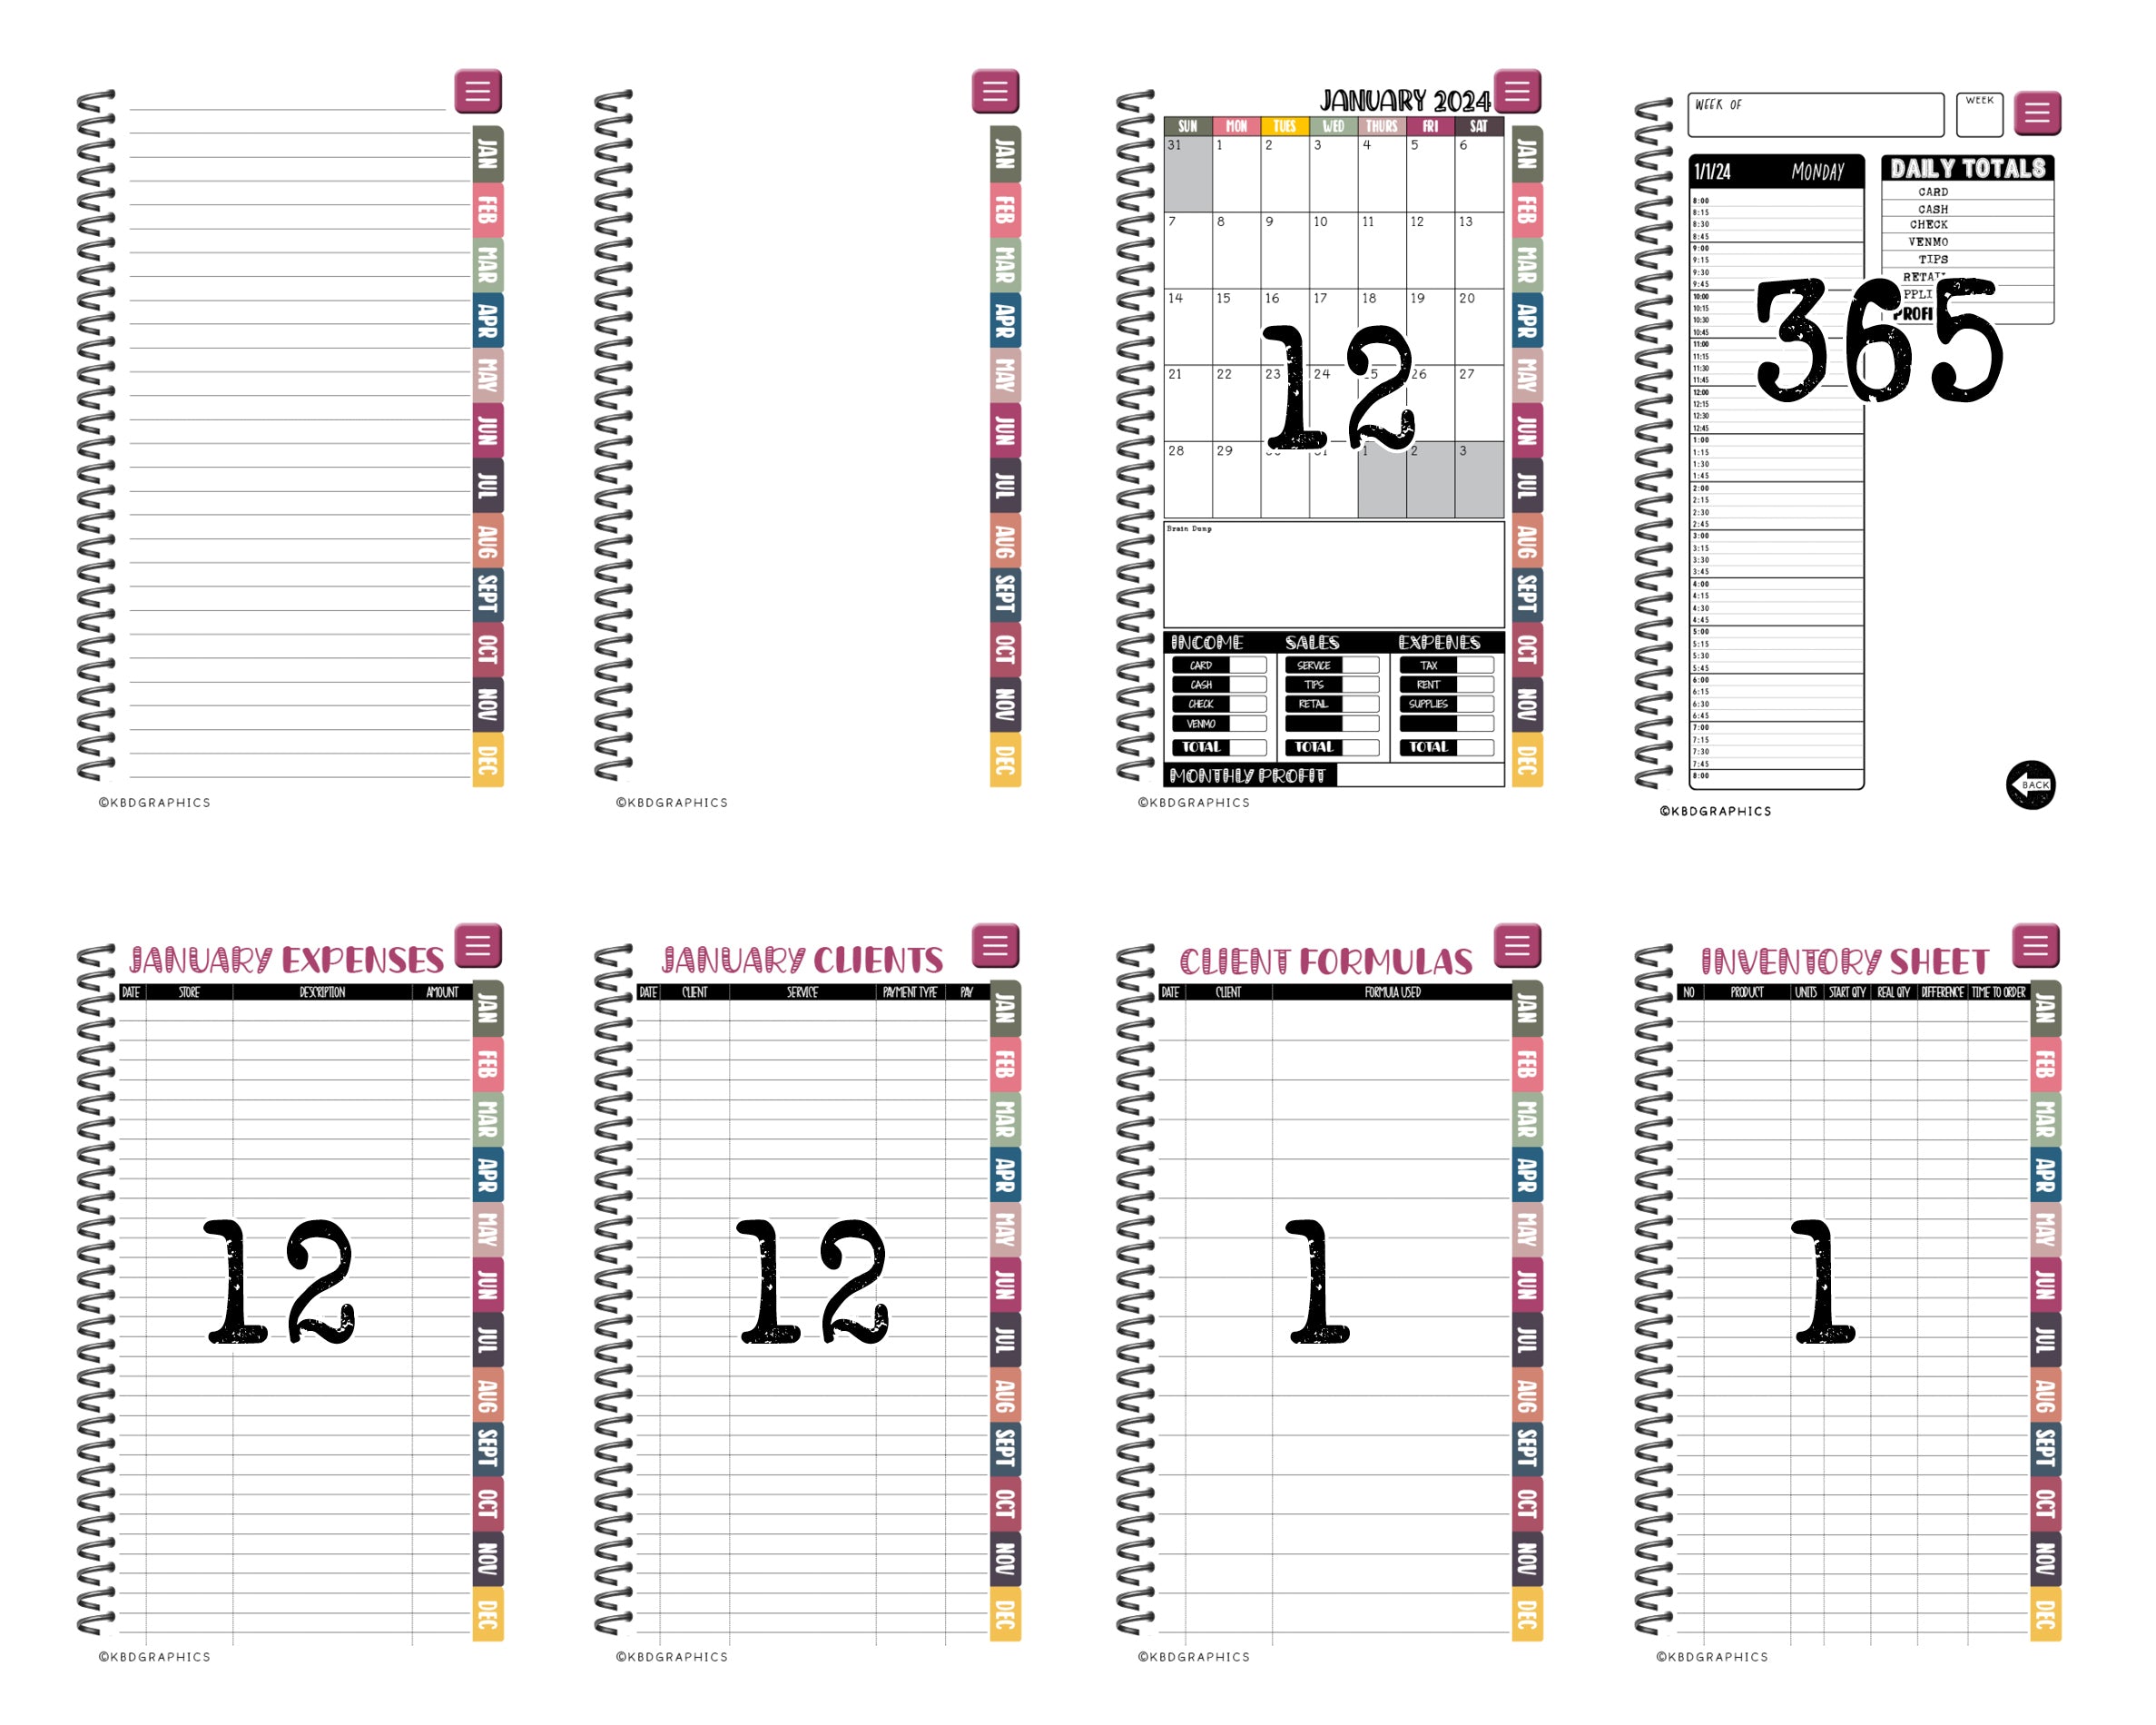 2024 PhoneLife Daily Keepall Digital Planner | BOHO FLORAL